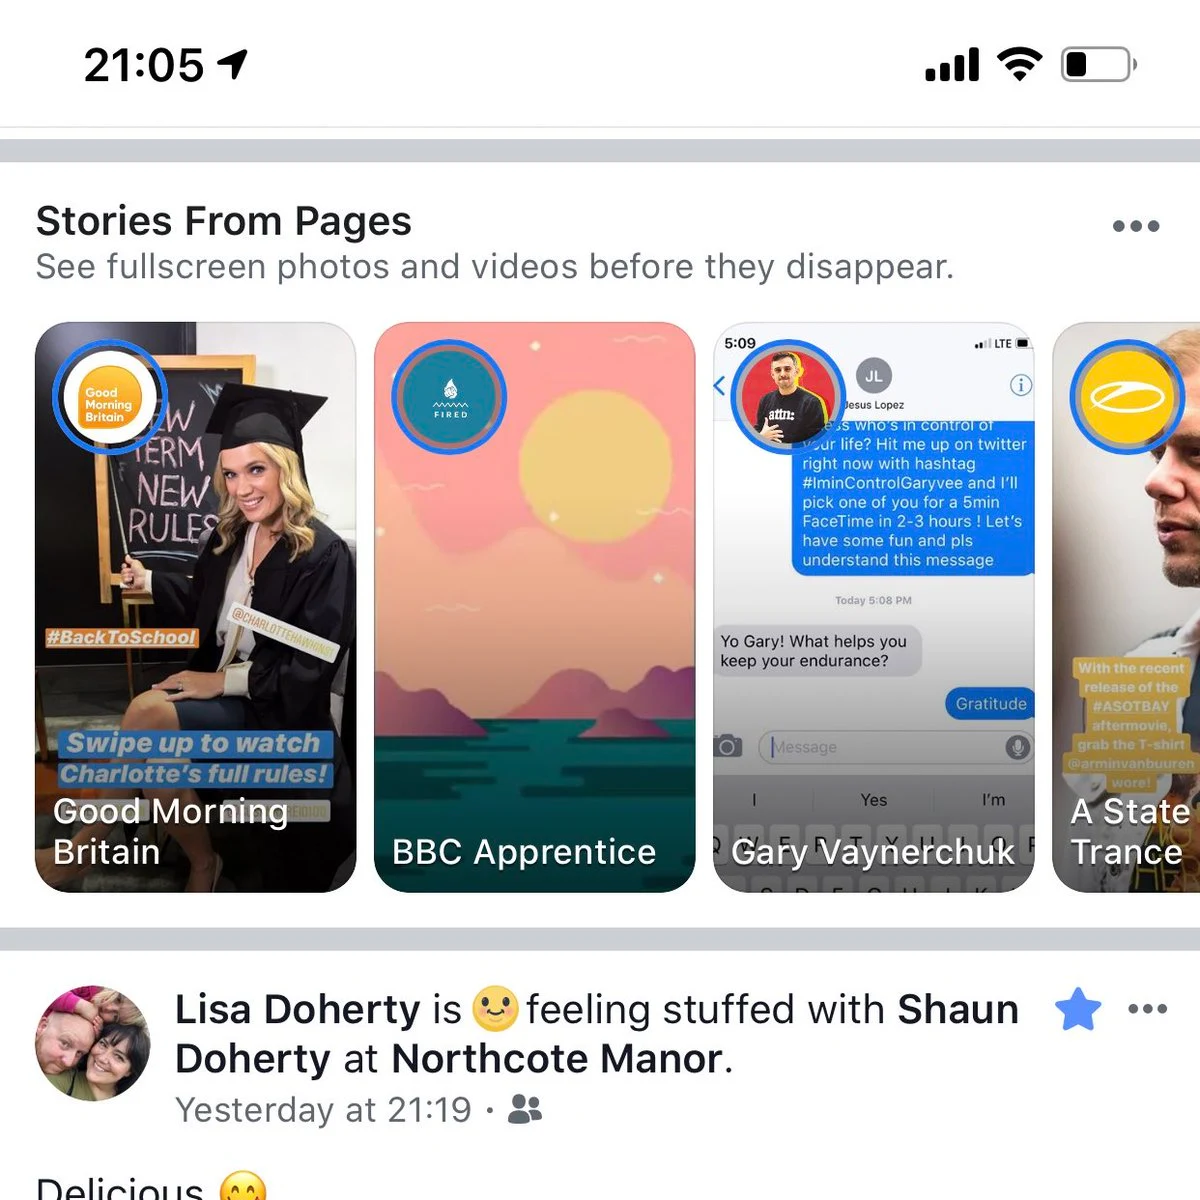 Facebook is Working on a new in-Feed Panel for Page Stories